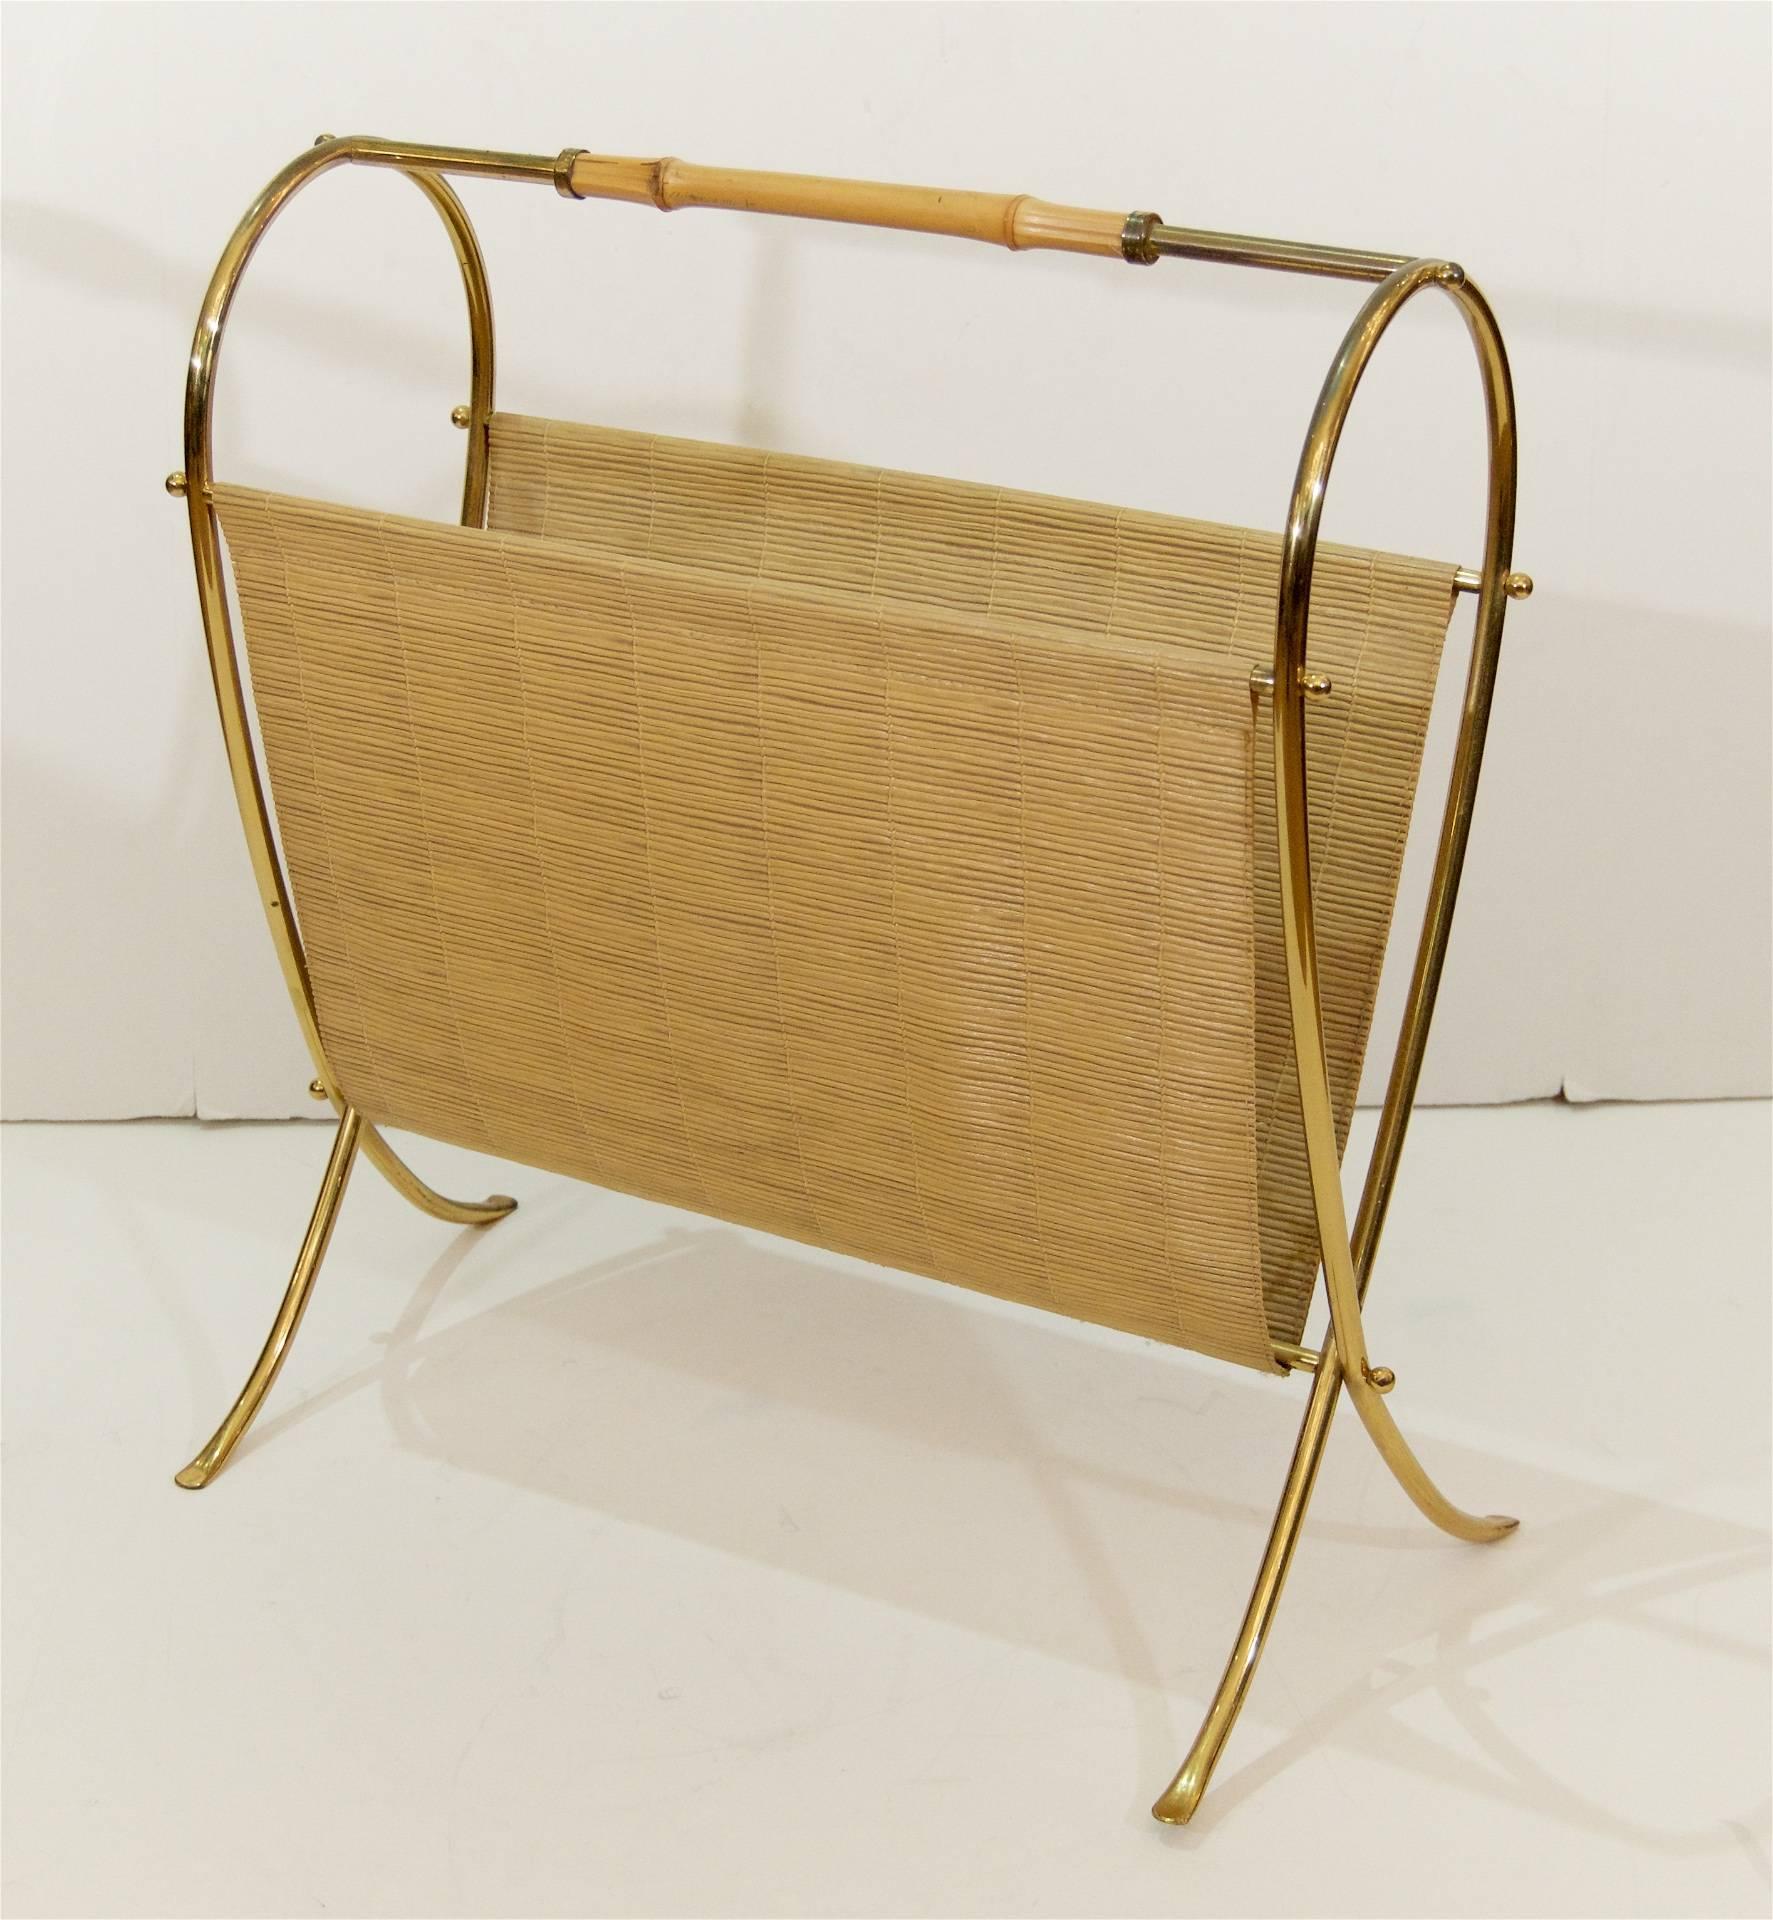 Magazine stand in brass with round ball finials and a bamboo handle. Pieces of faux bamboo wraparound the frame to create a receptacle for newspapers and books.